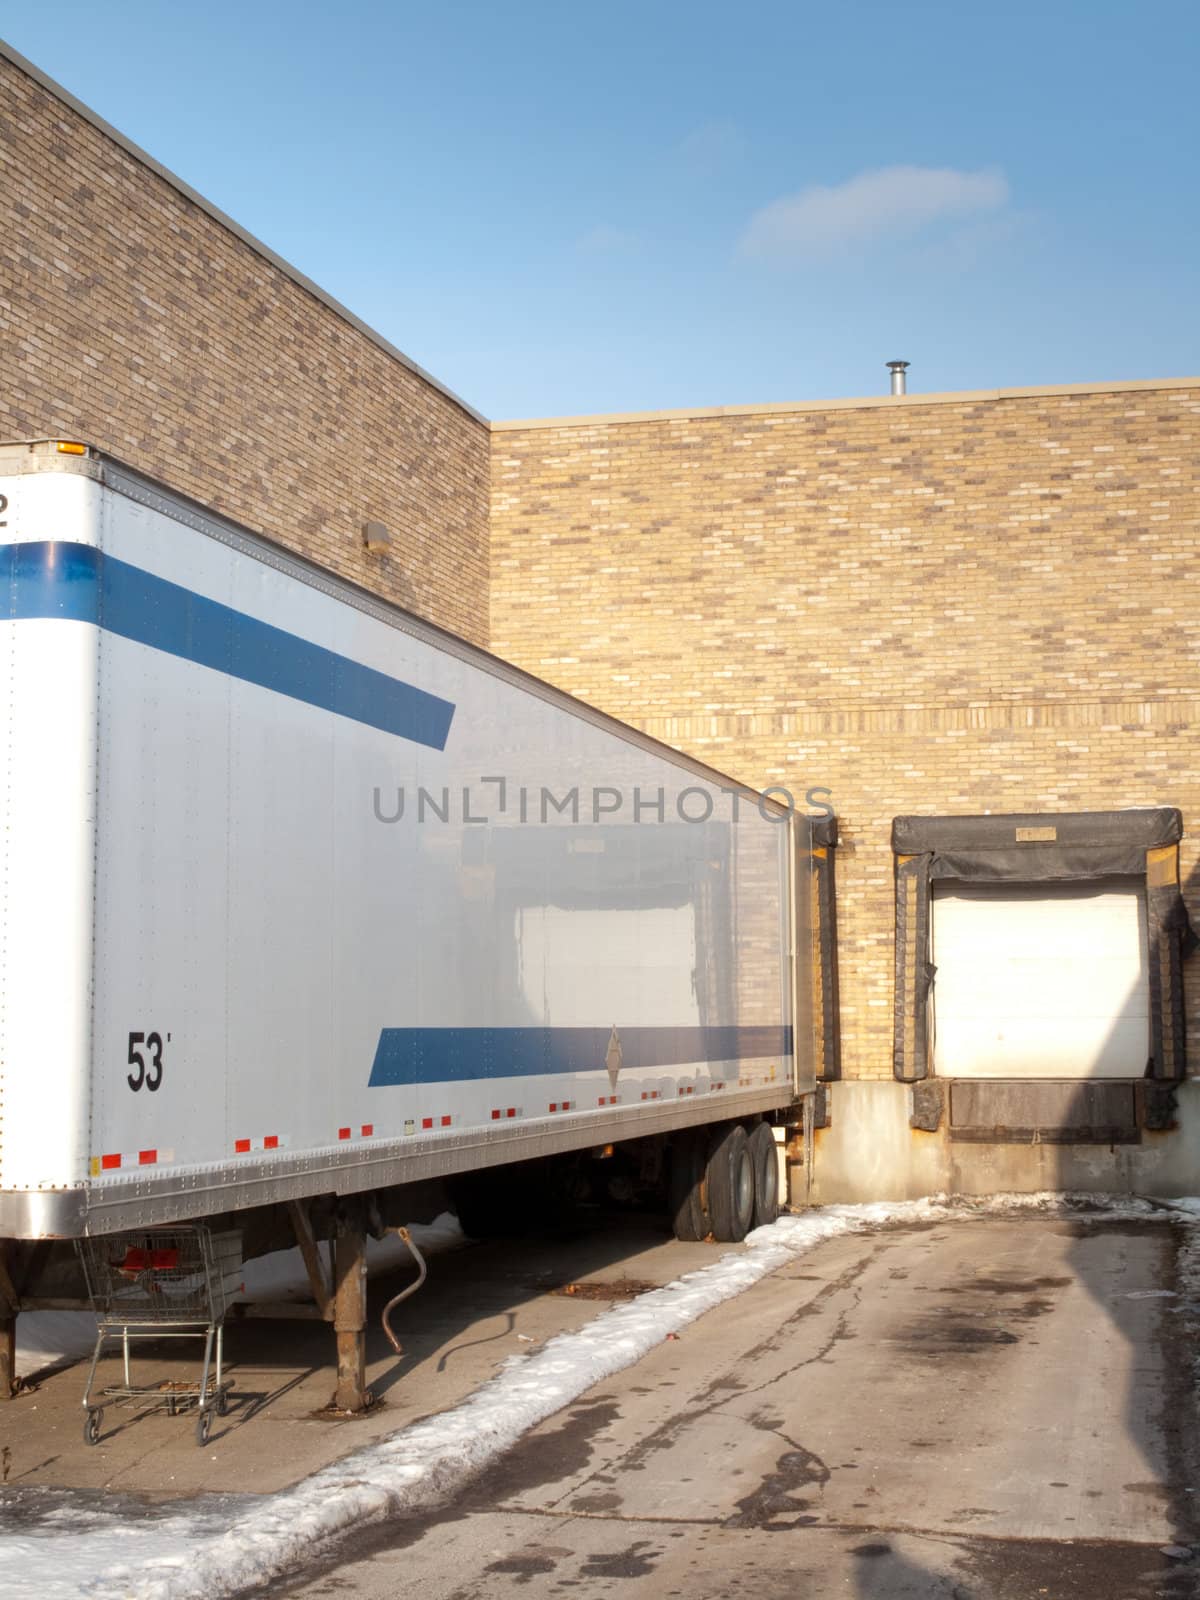 A loading dock with one empty bay and a trailer in the other bay.